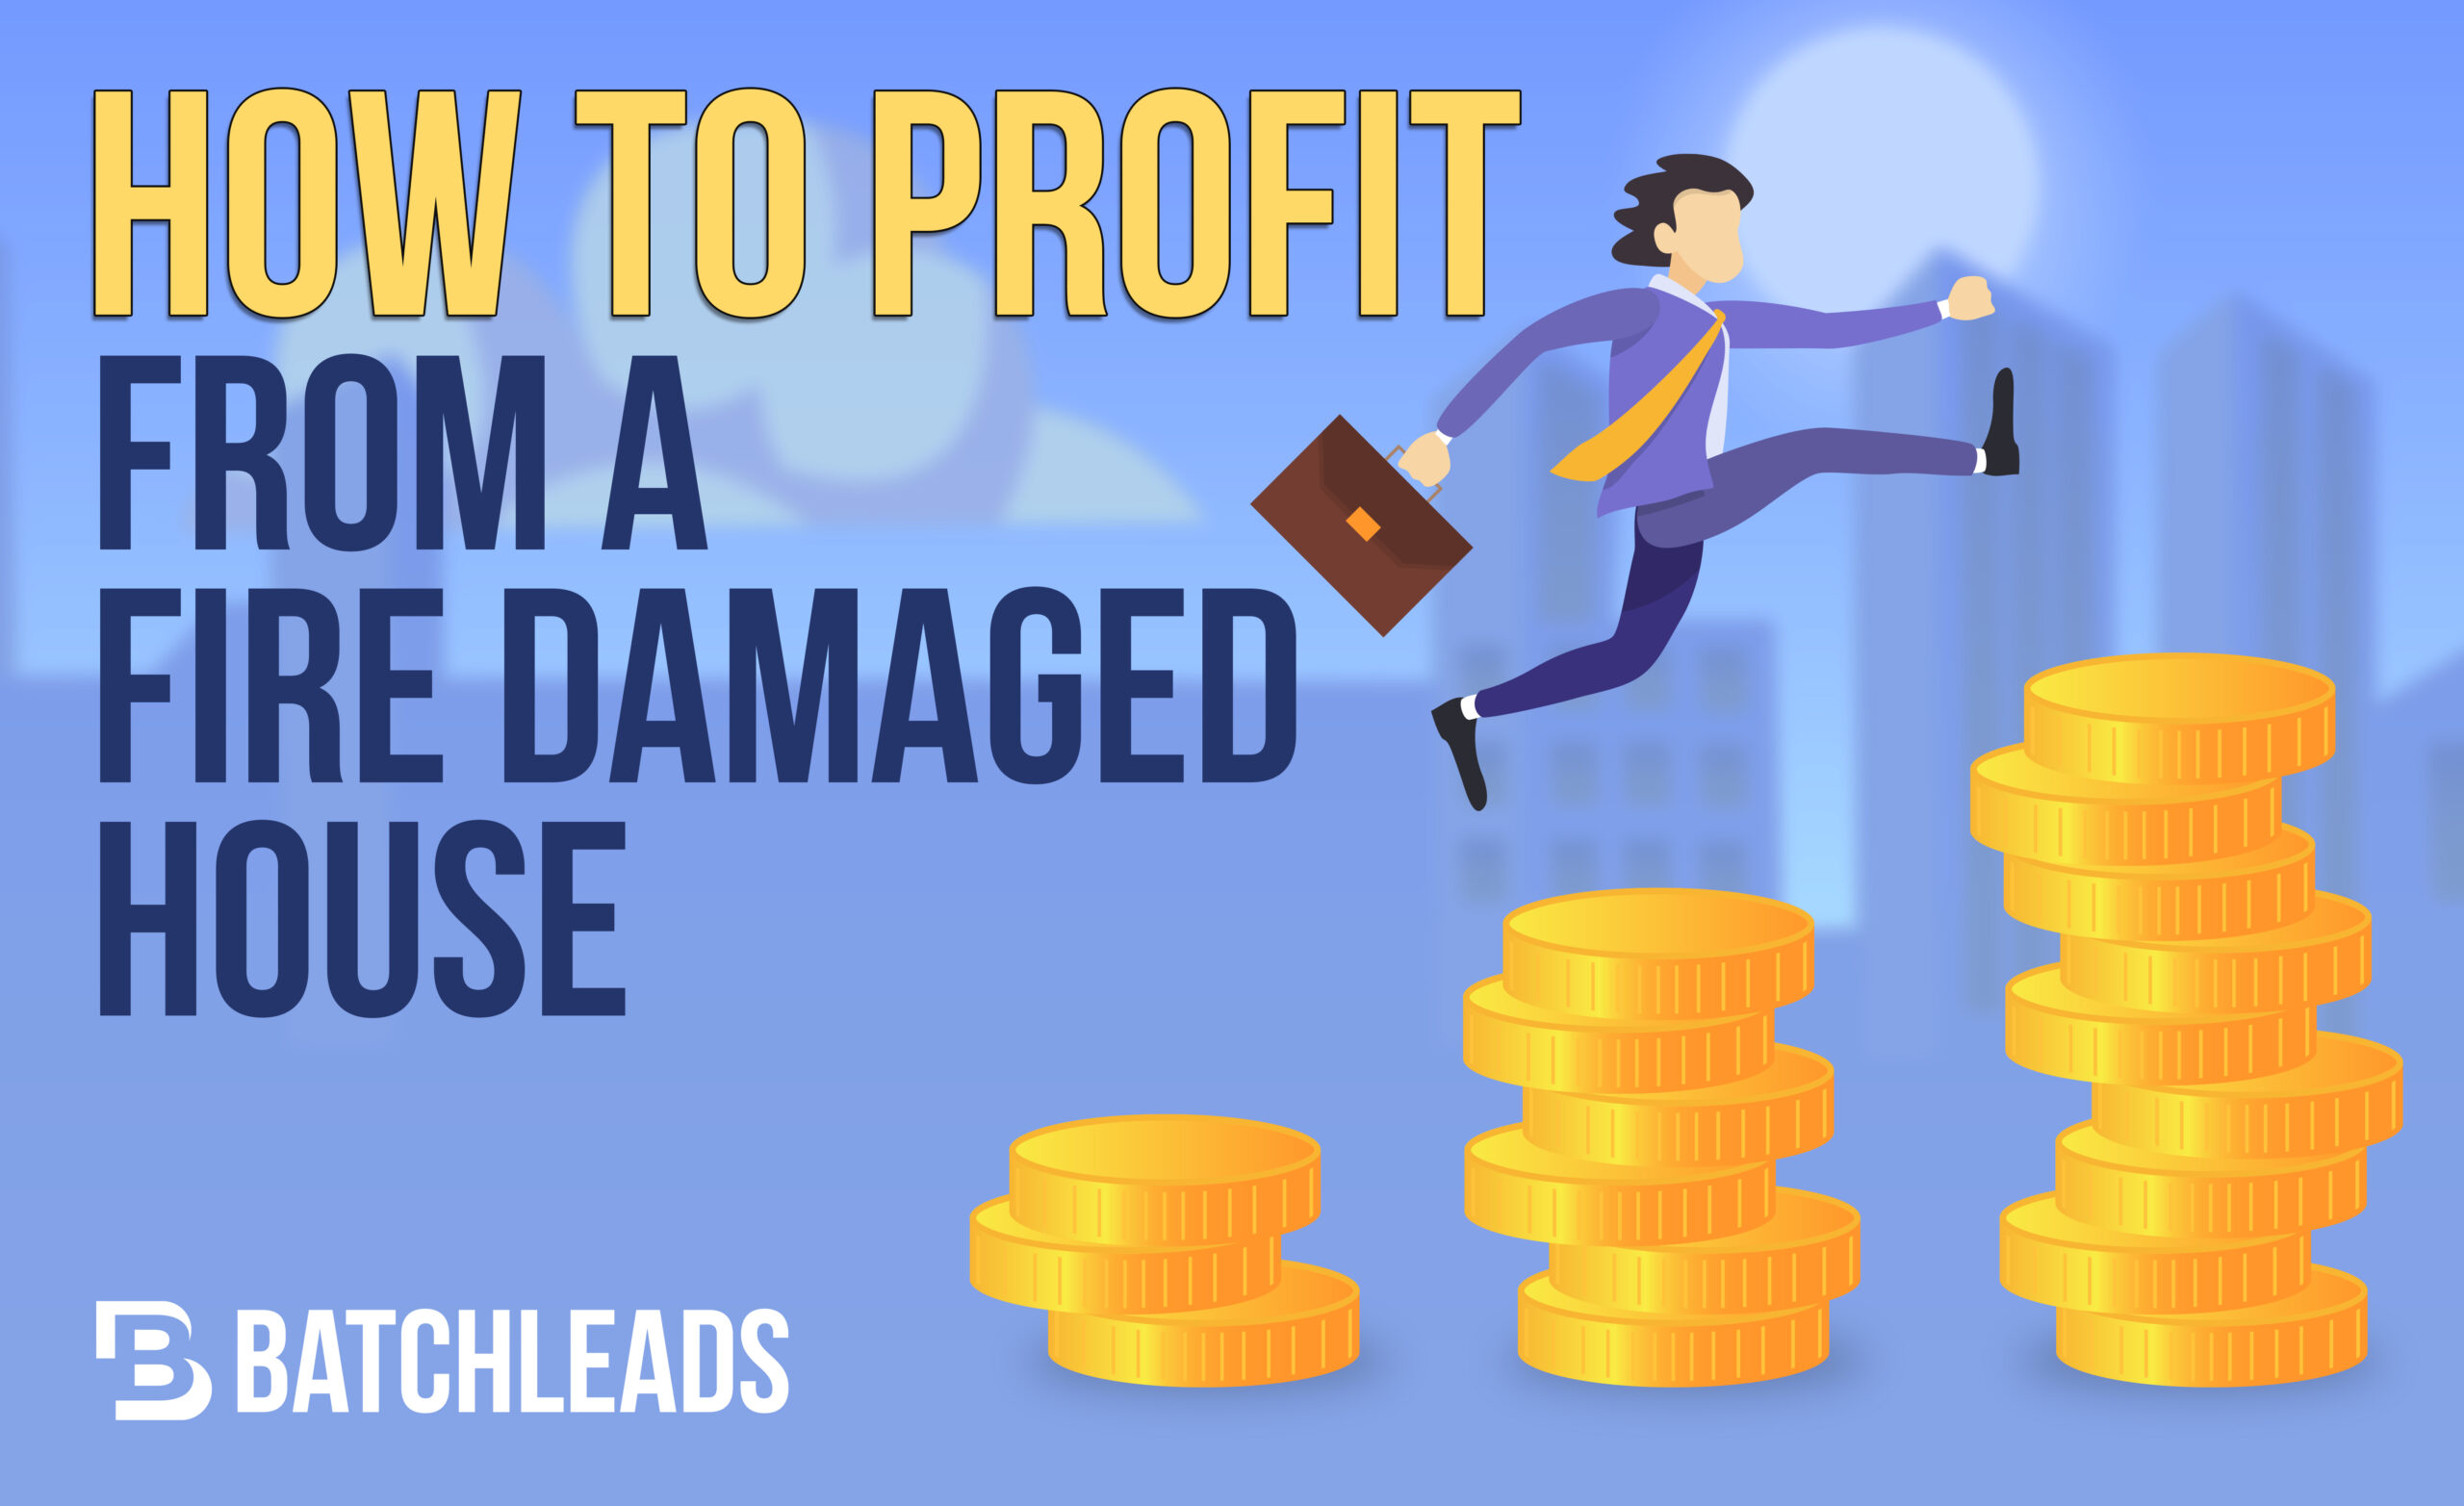 How To Profit From a Fire Damaged House